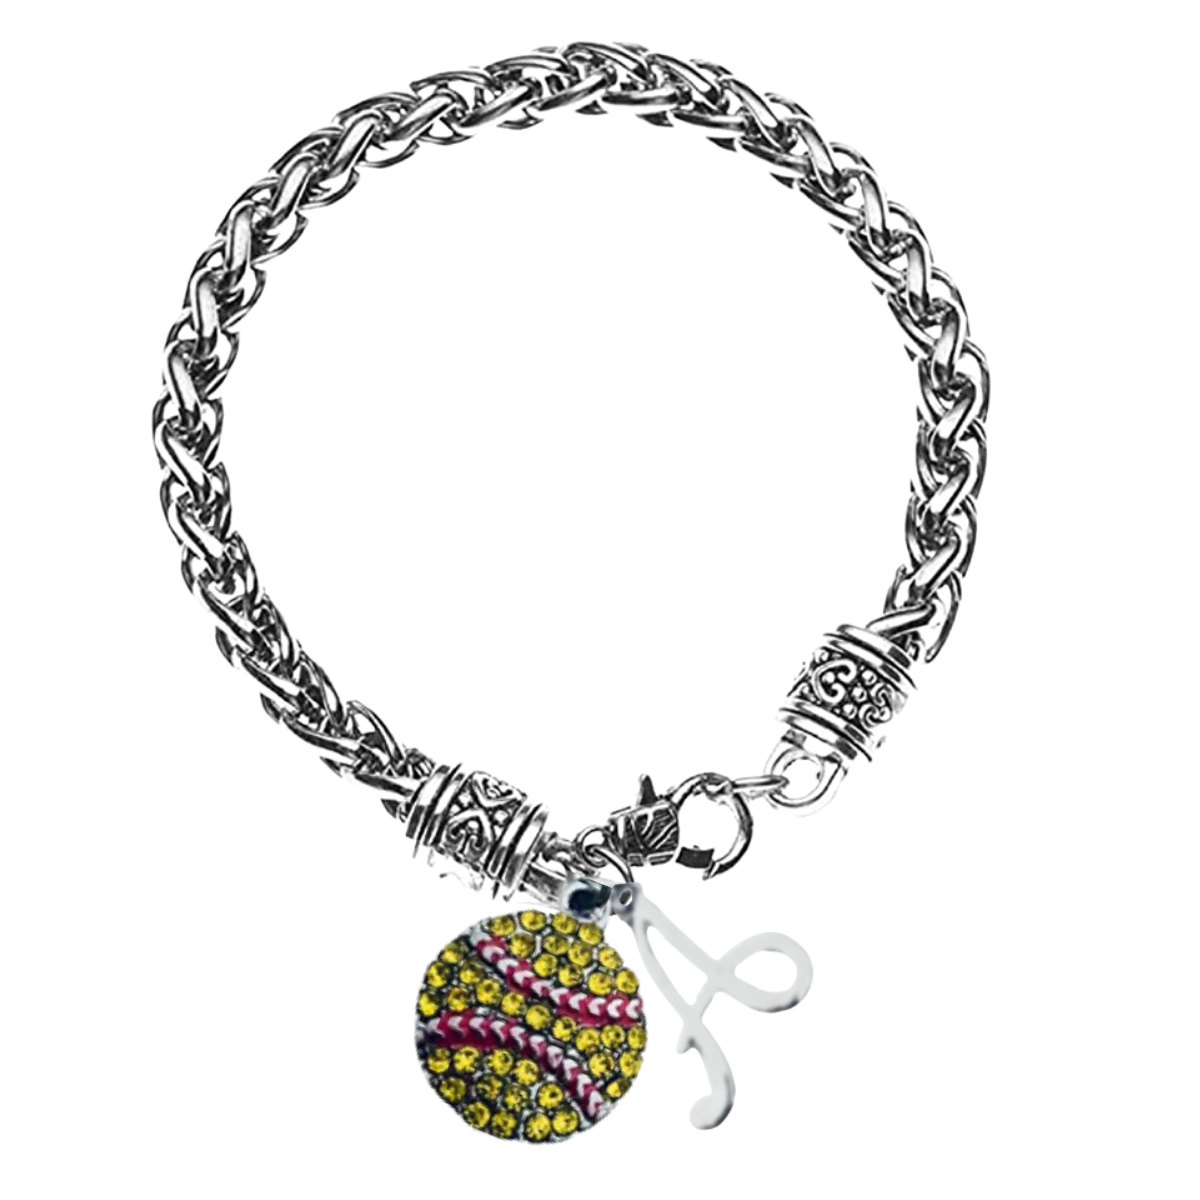 Personalized Softball Bracelet with Initial Charm